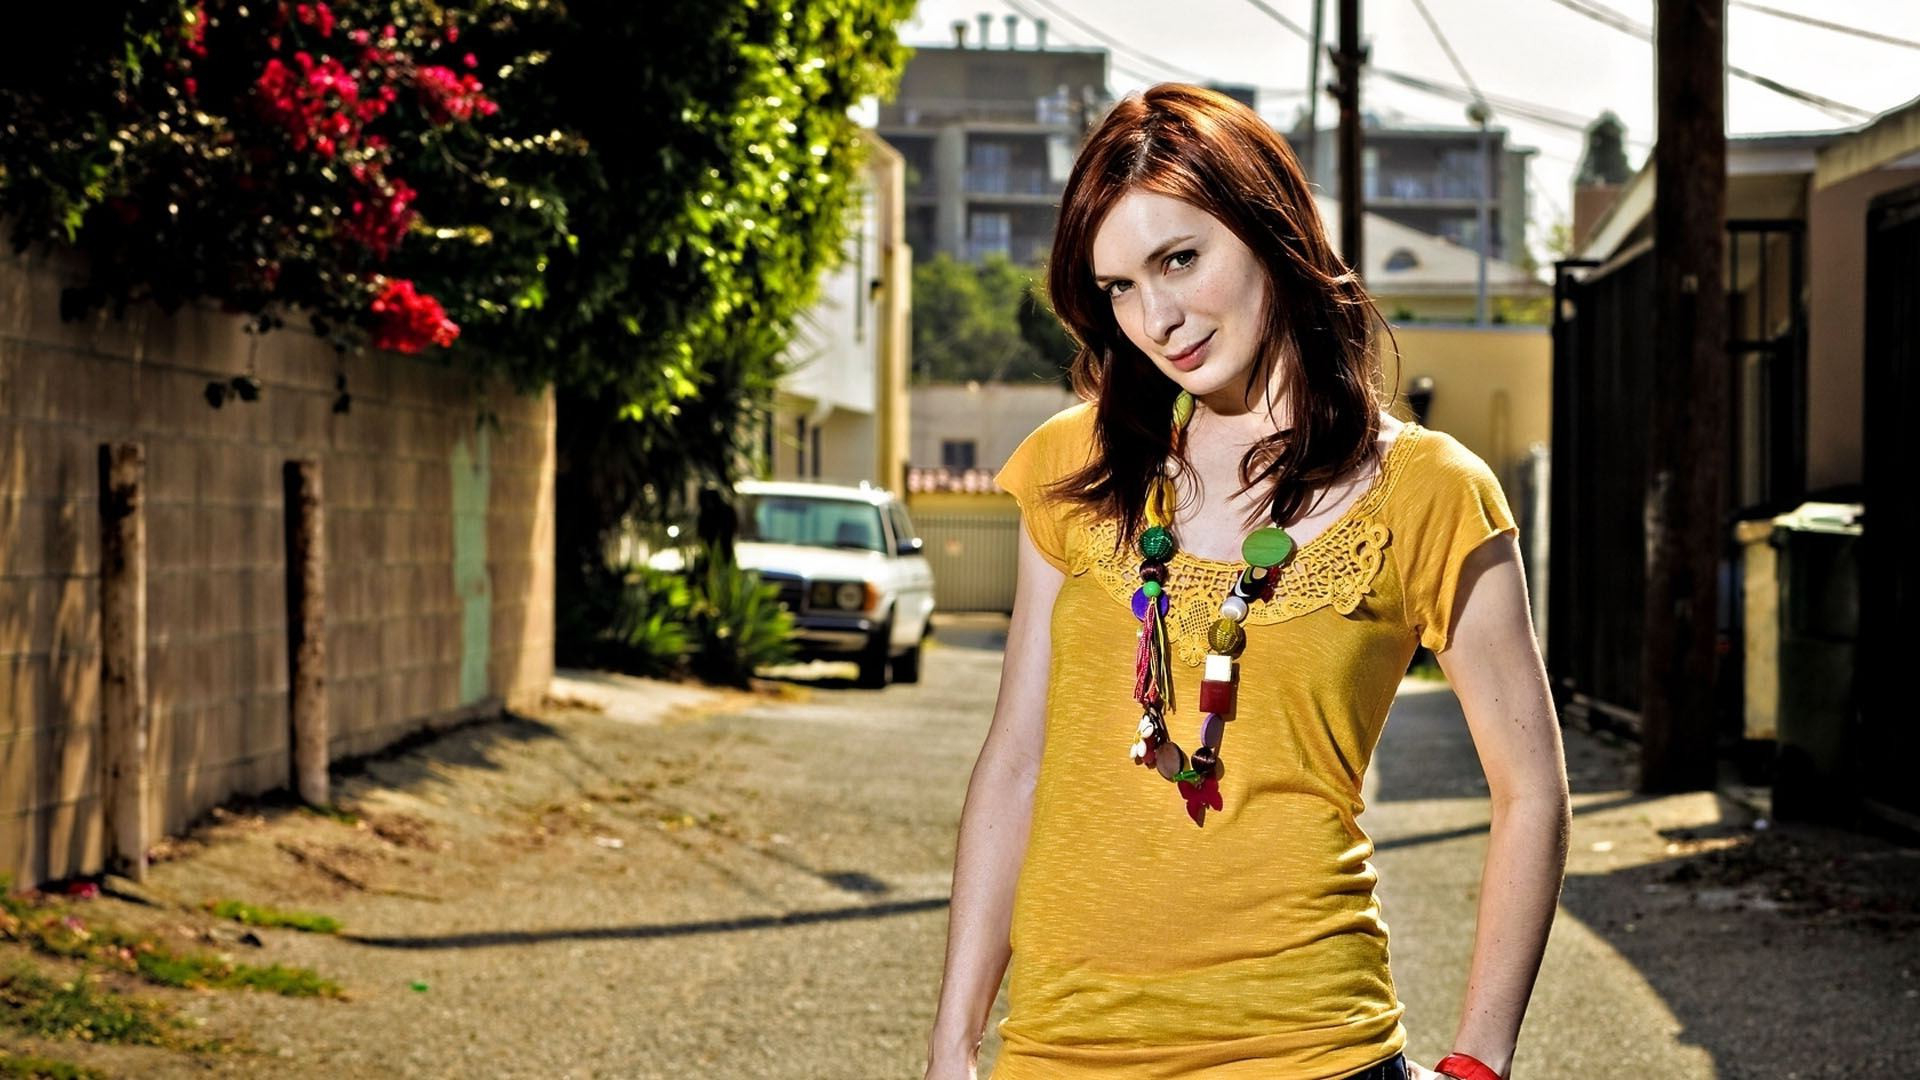 Cool Backgrounds  Felicia Day